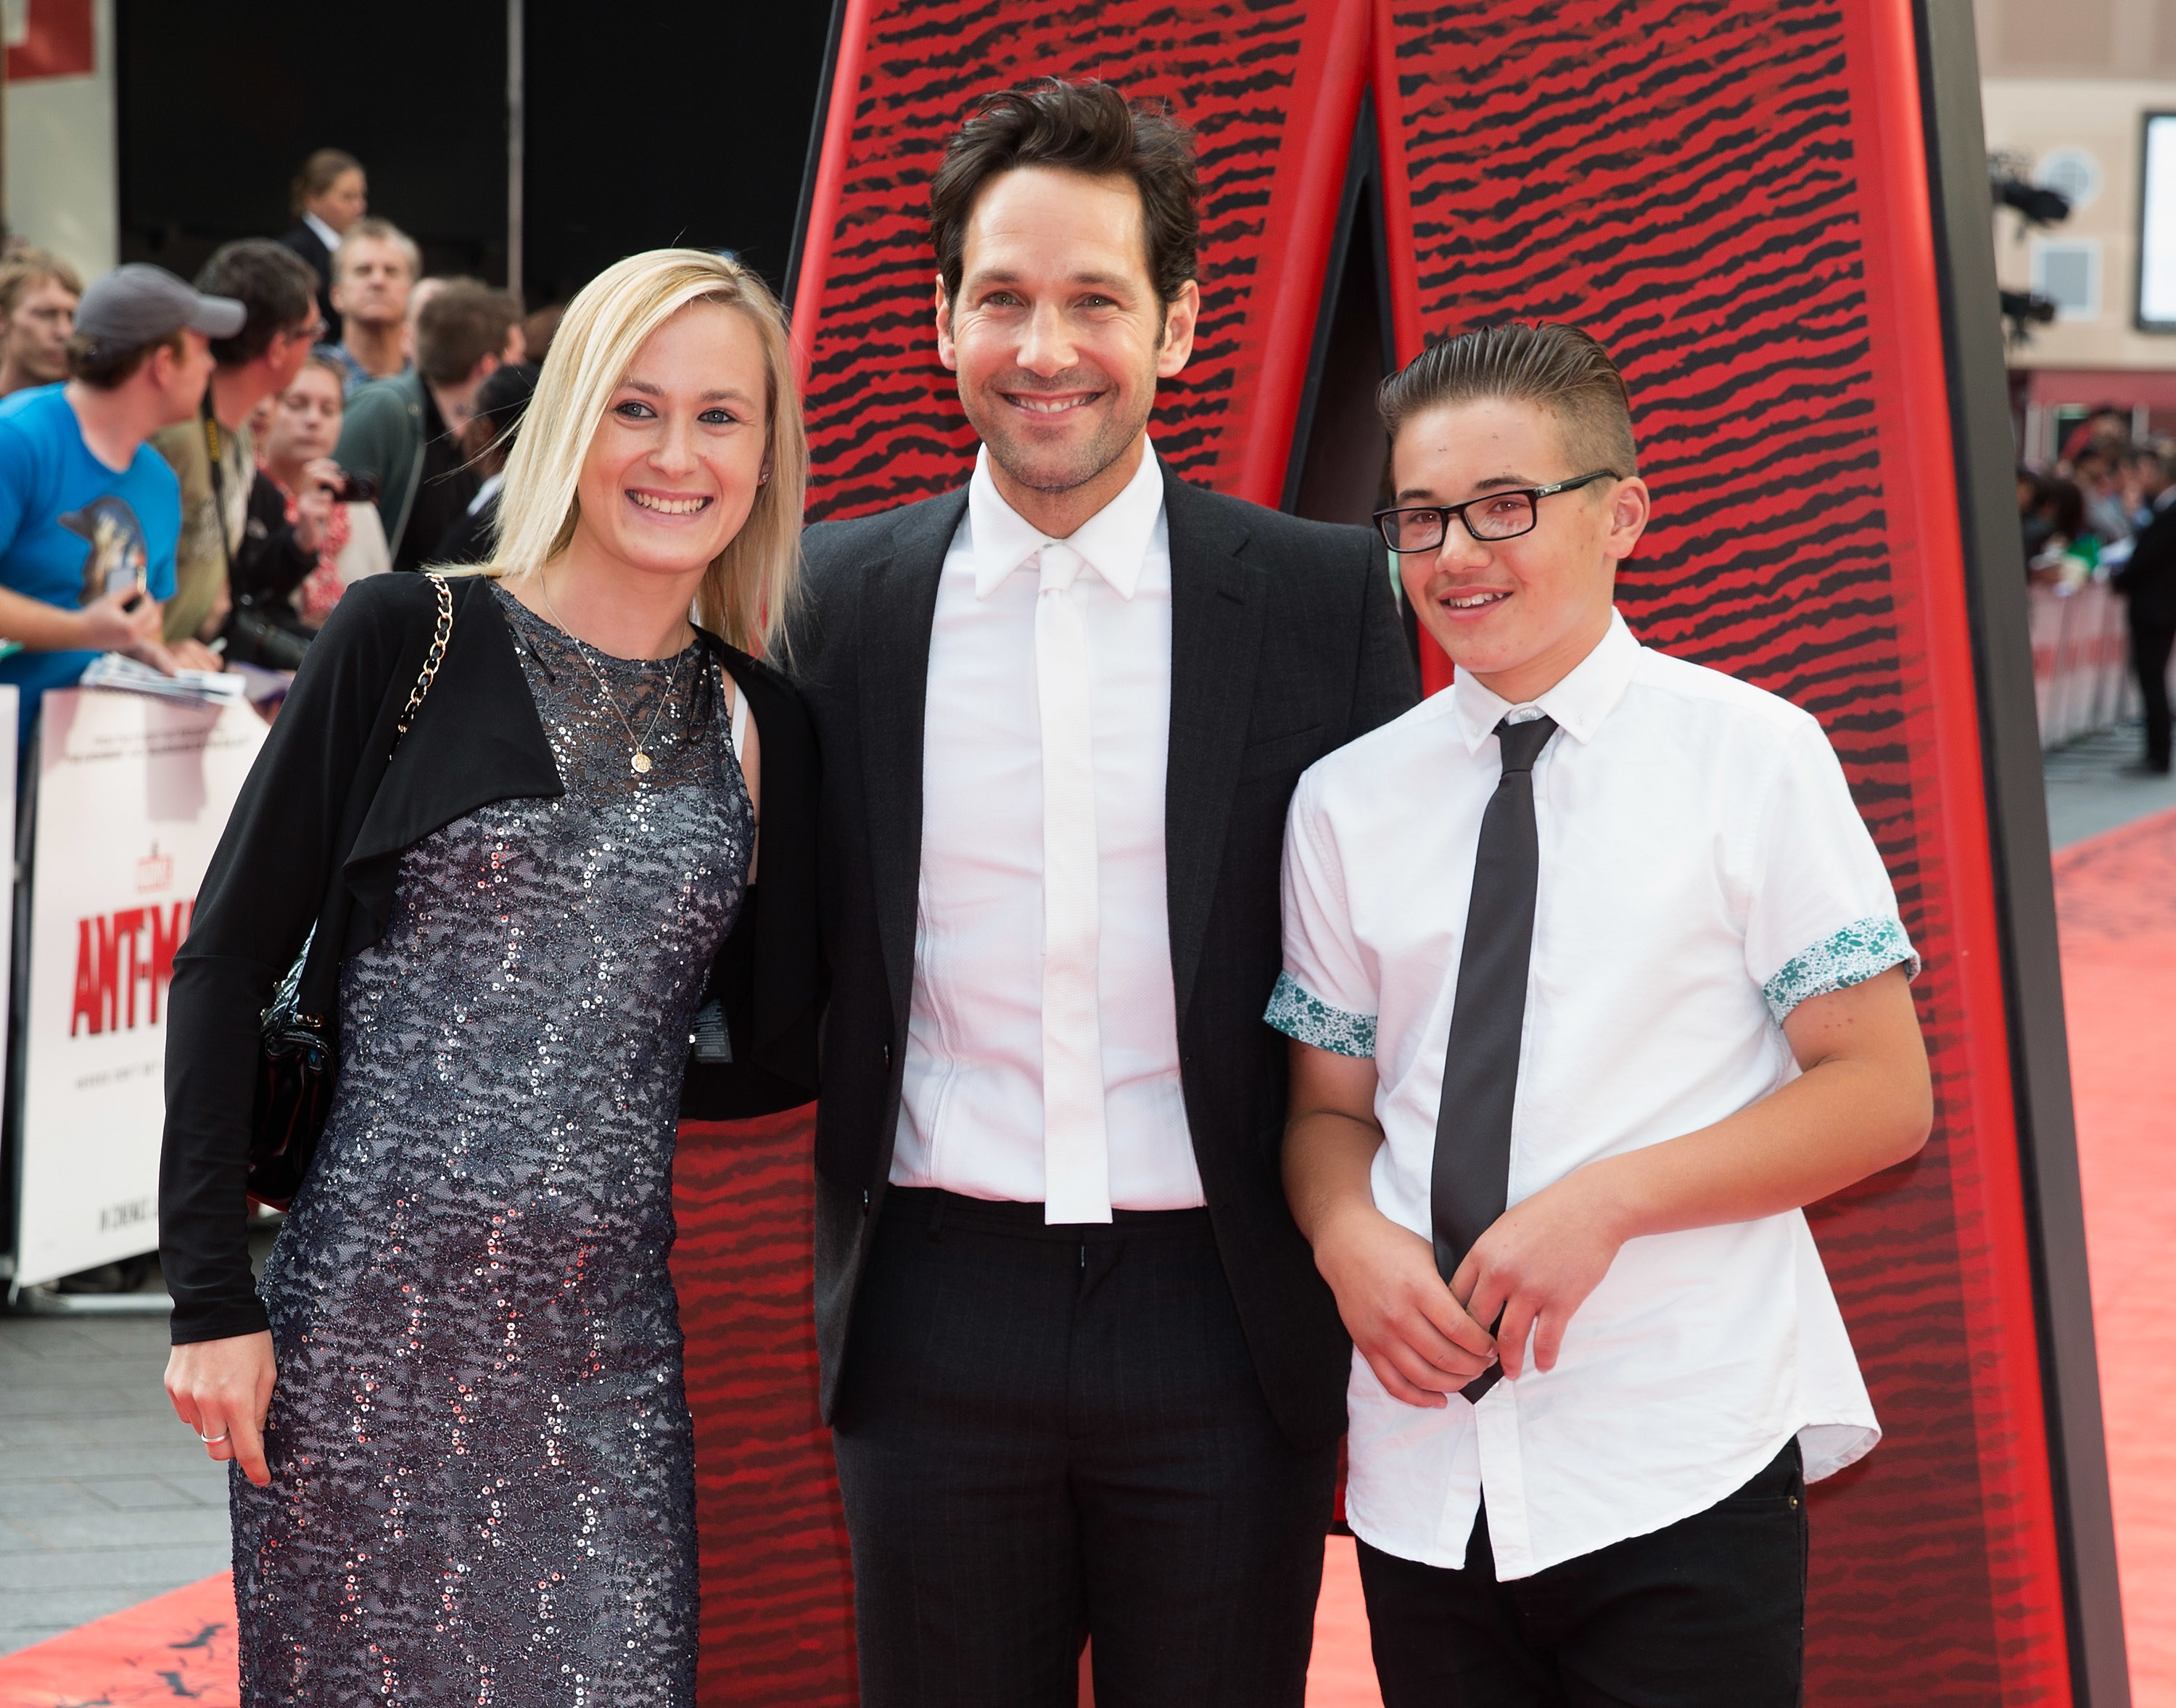 Ant-Man' Star Paul Rudd's Son Thought He Worked in a Movie Theater